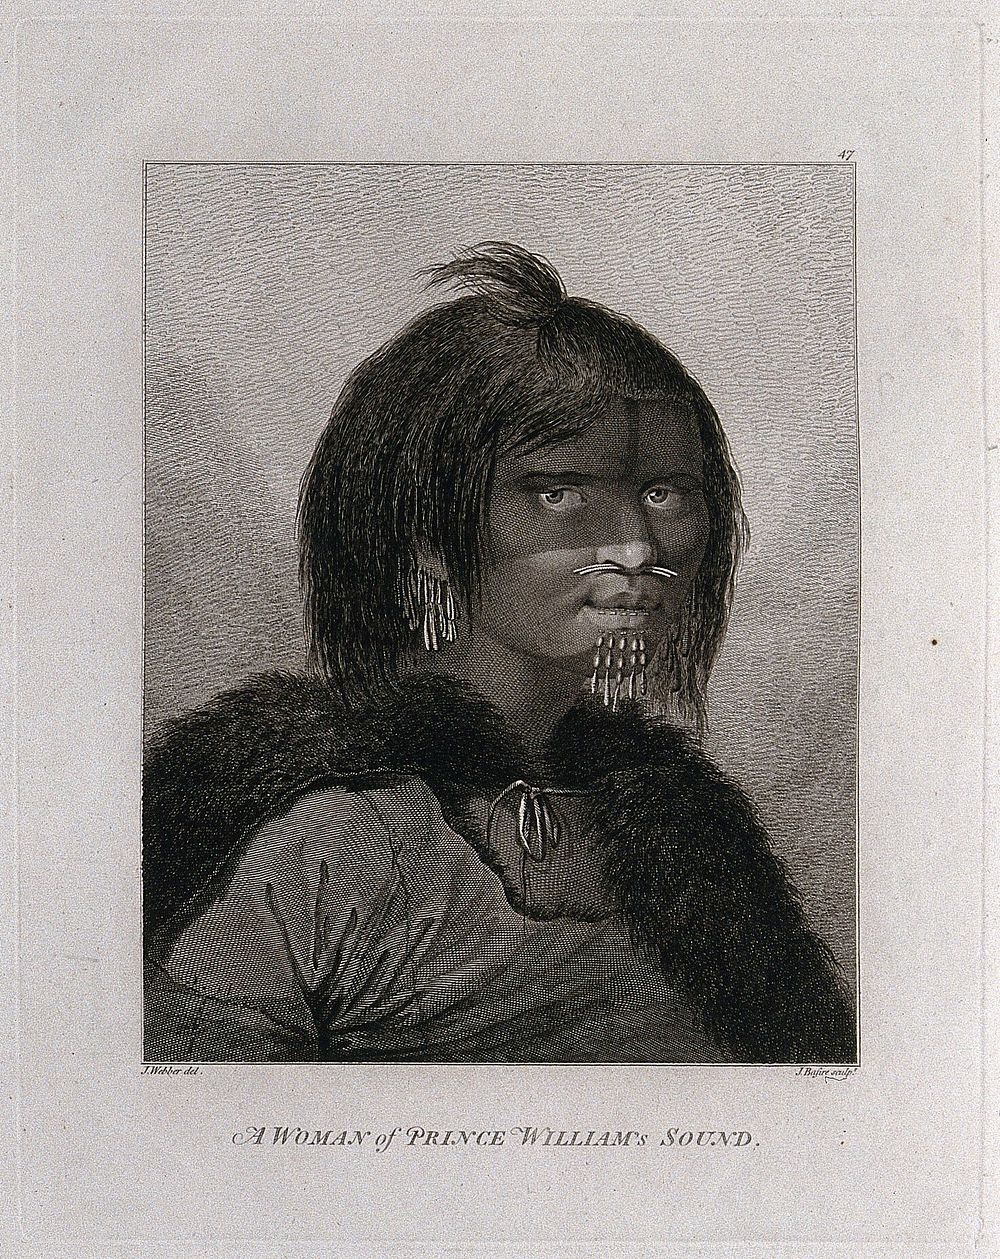 A woman from Prince William Sound, Alaska, head and shoulders; encountered by Captain Cook on his third voyage (1777-1780).…